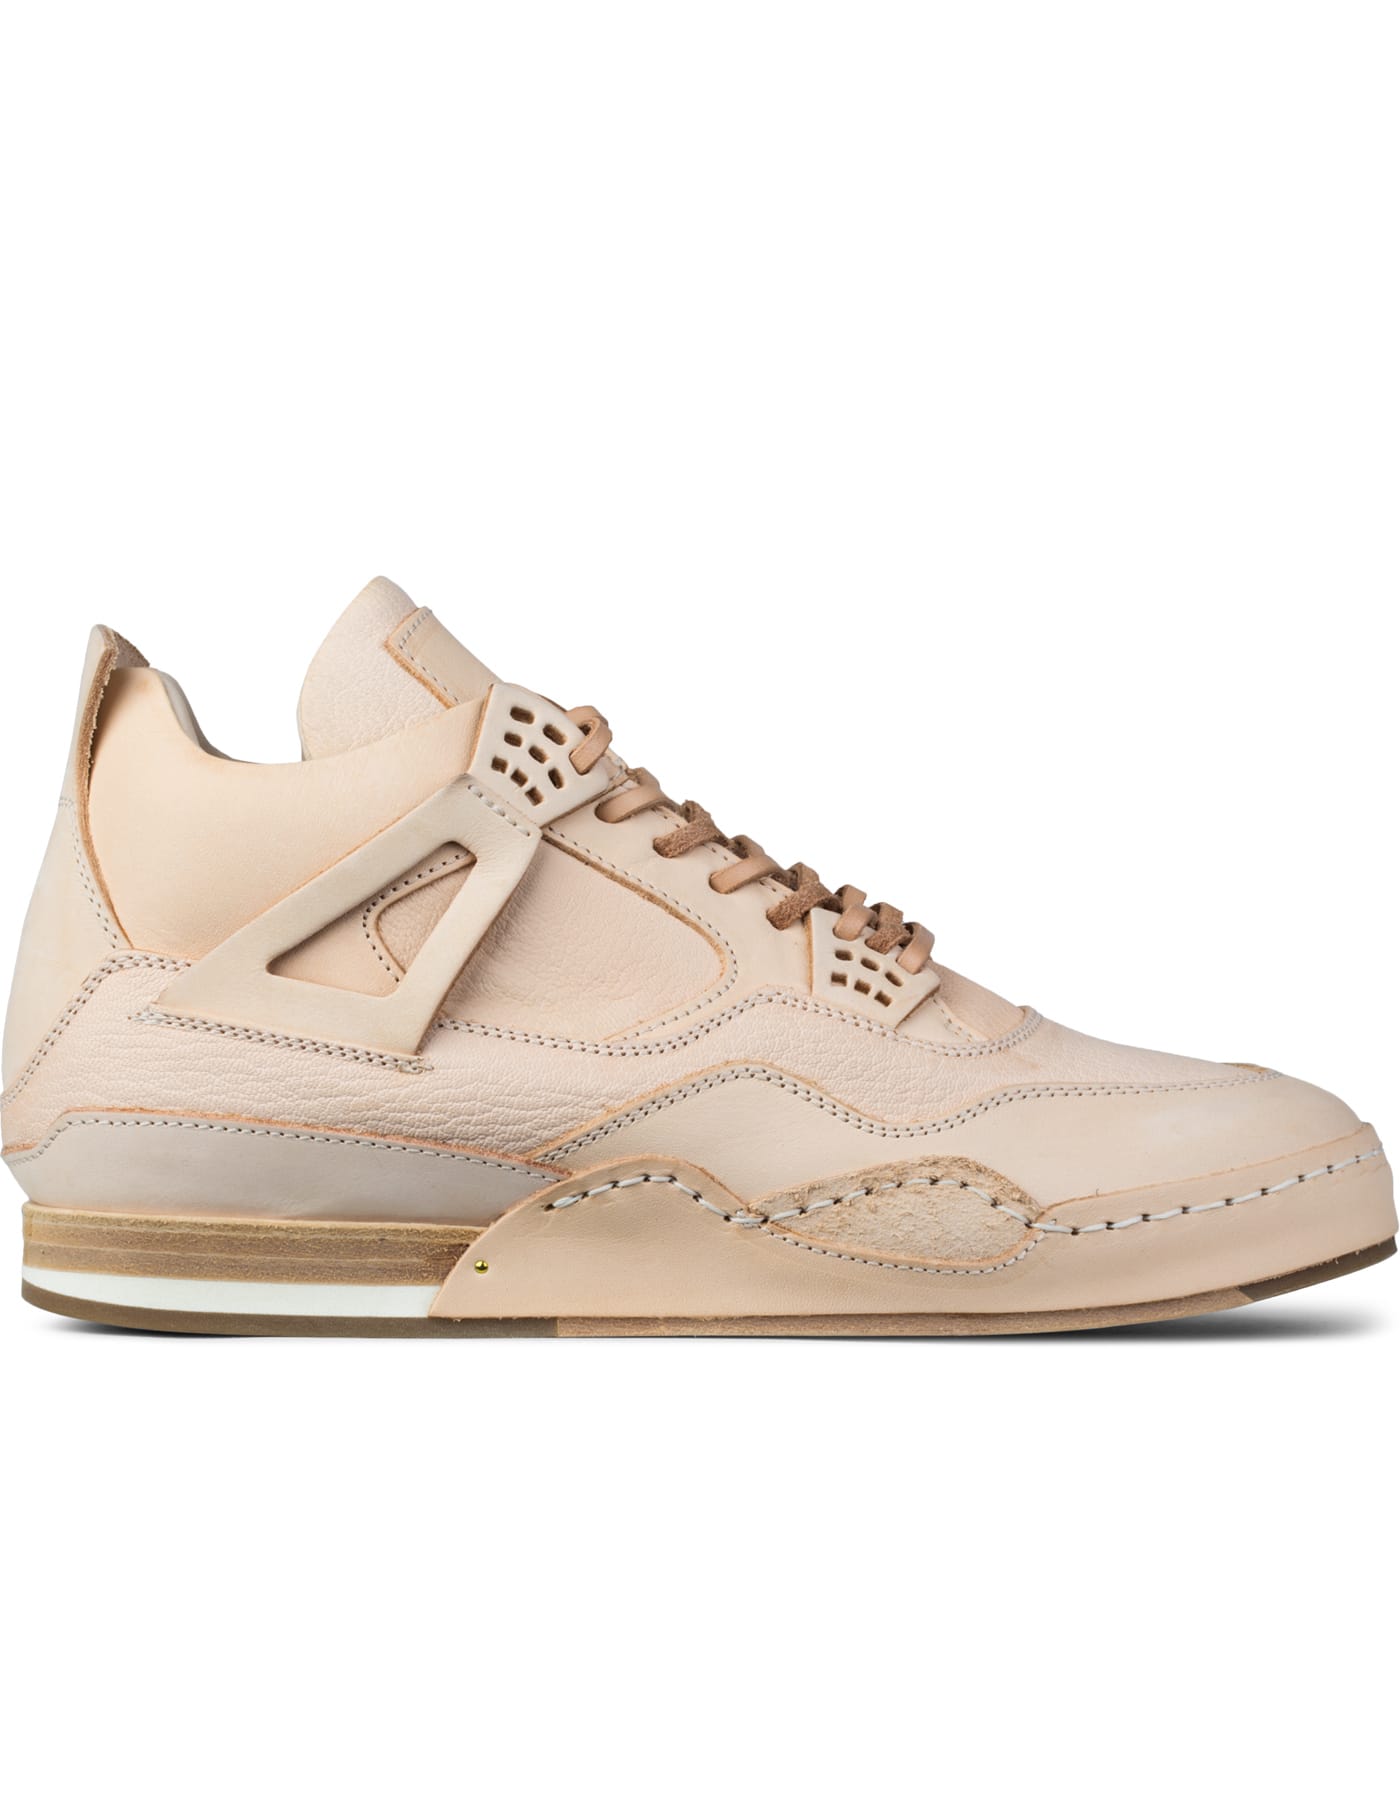 Hender Scheme - Natural Manual Industrial Products 10 | HBX